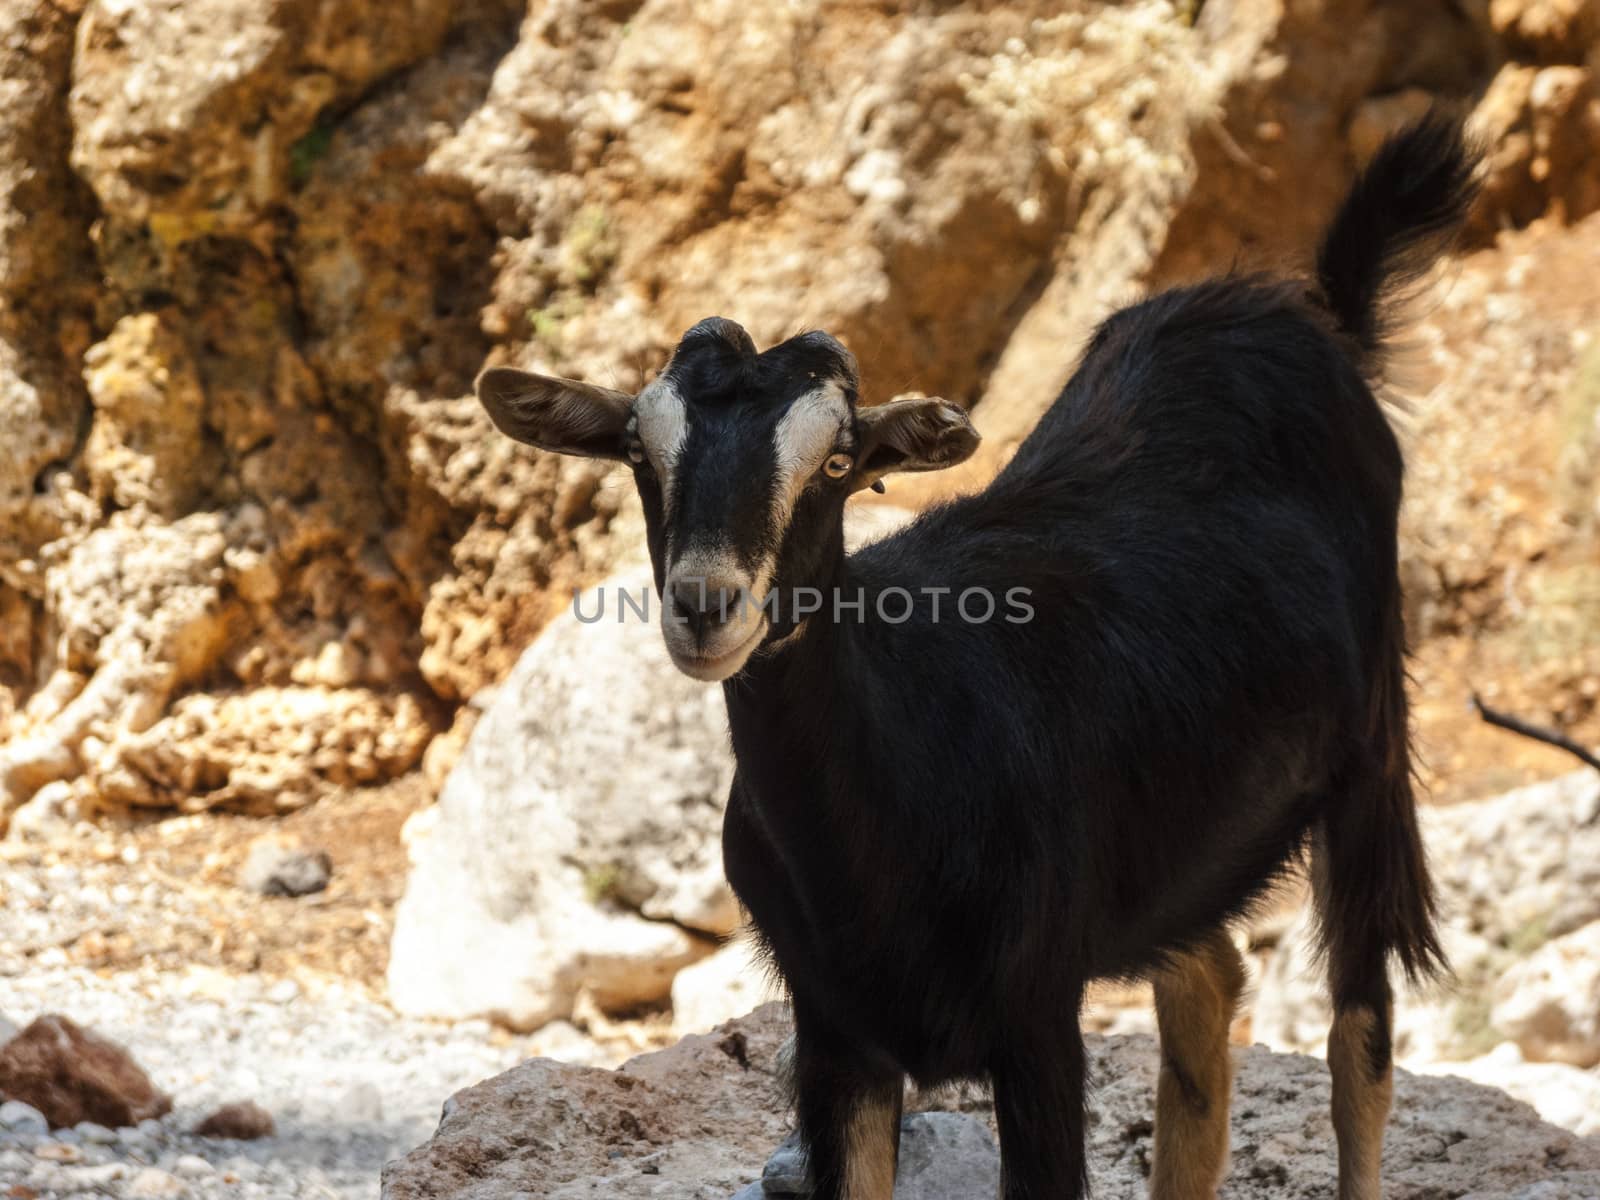 A Wild Goat free in the mountain